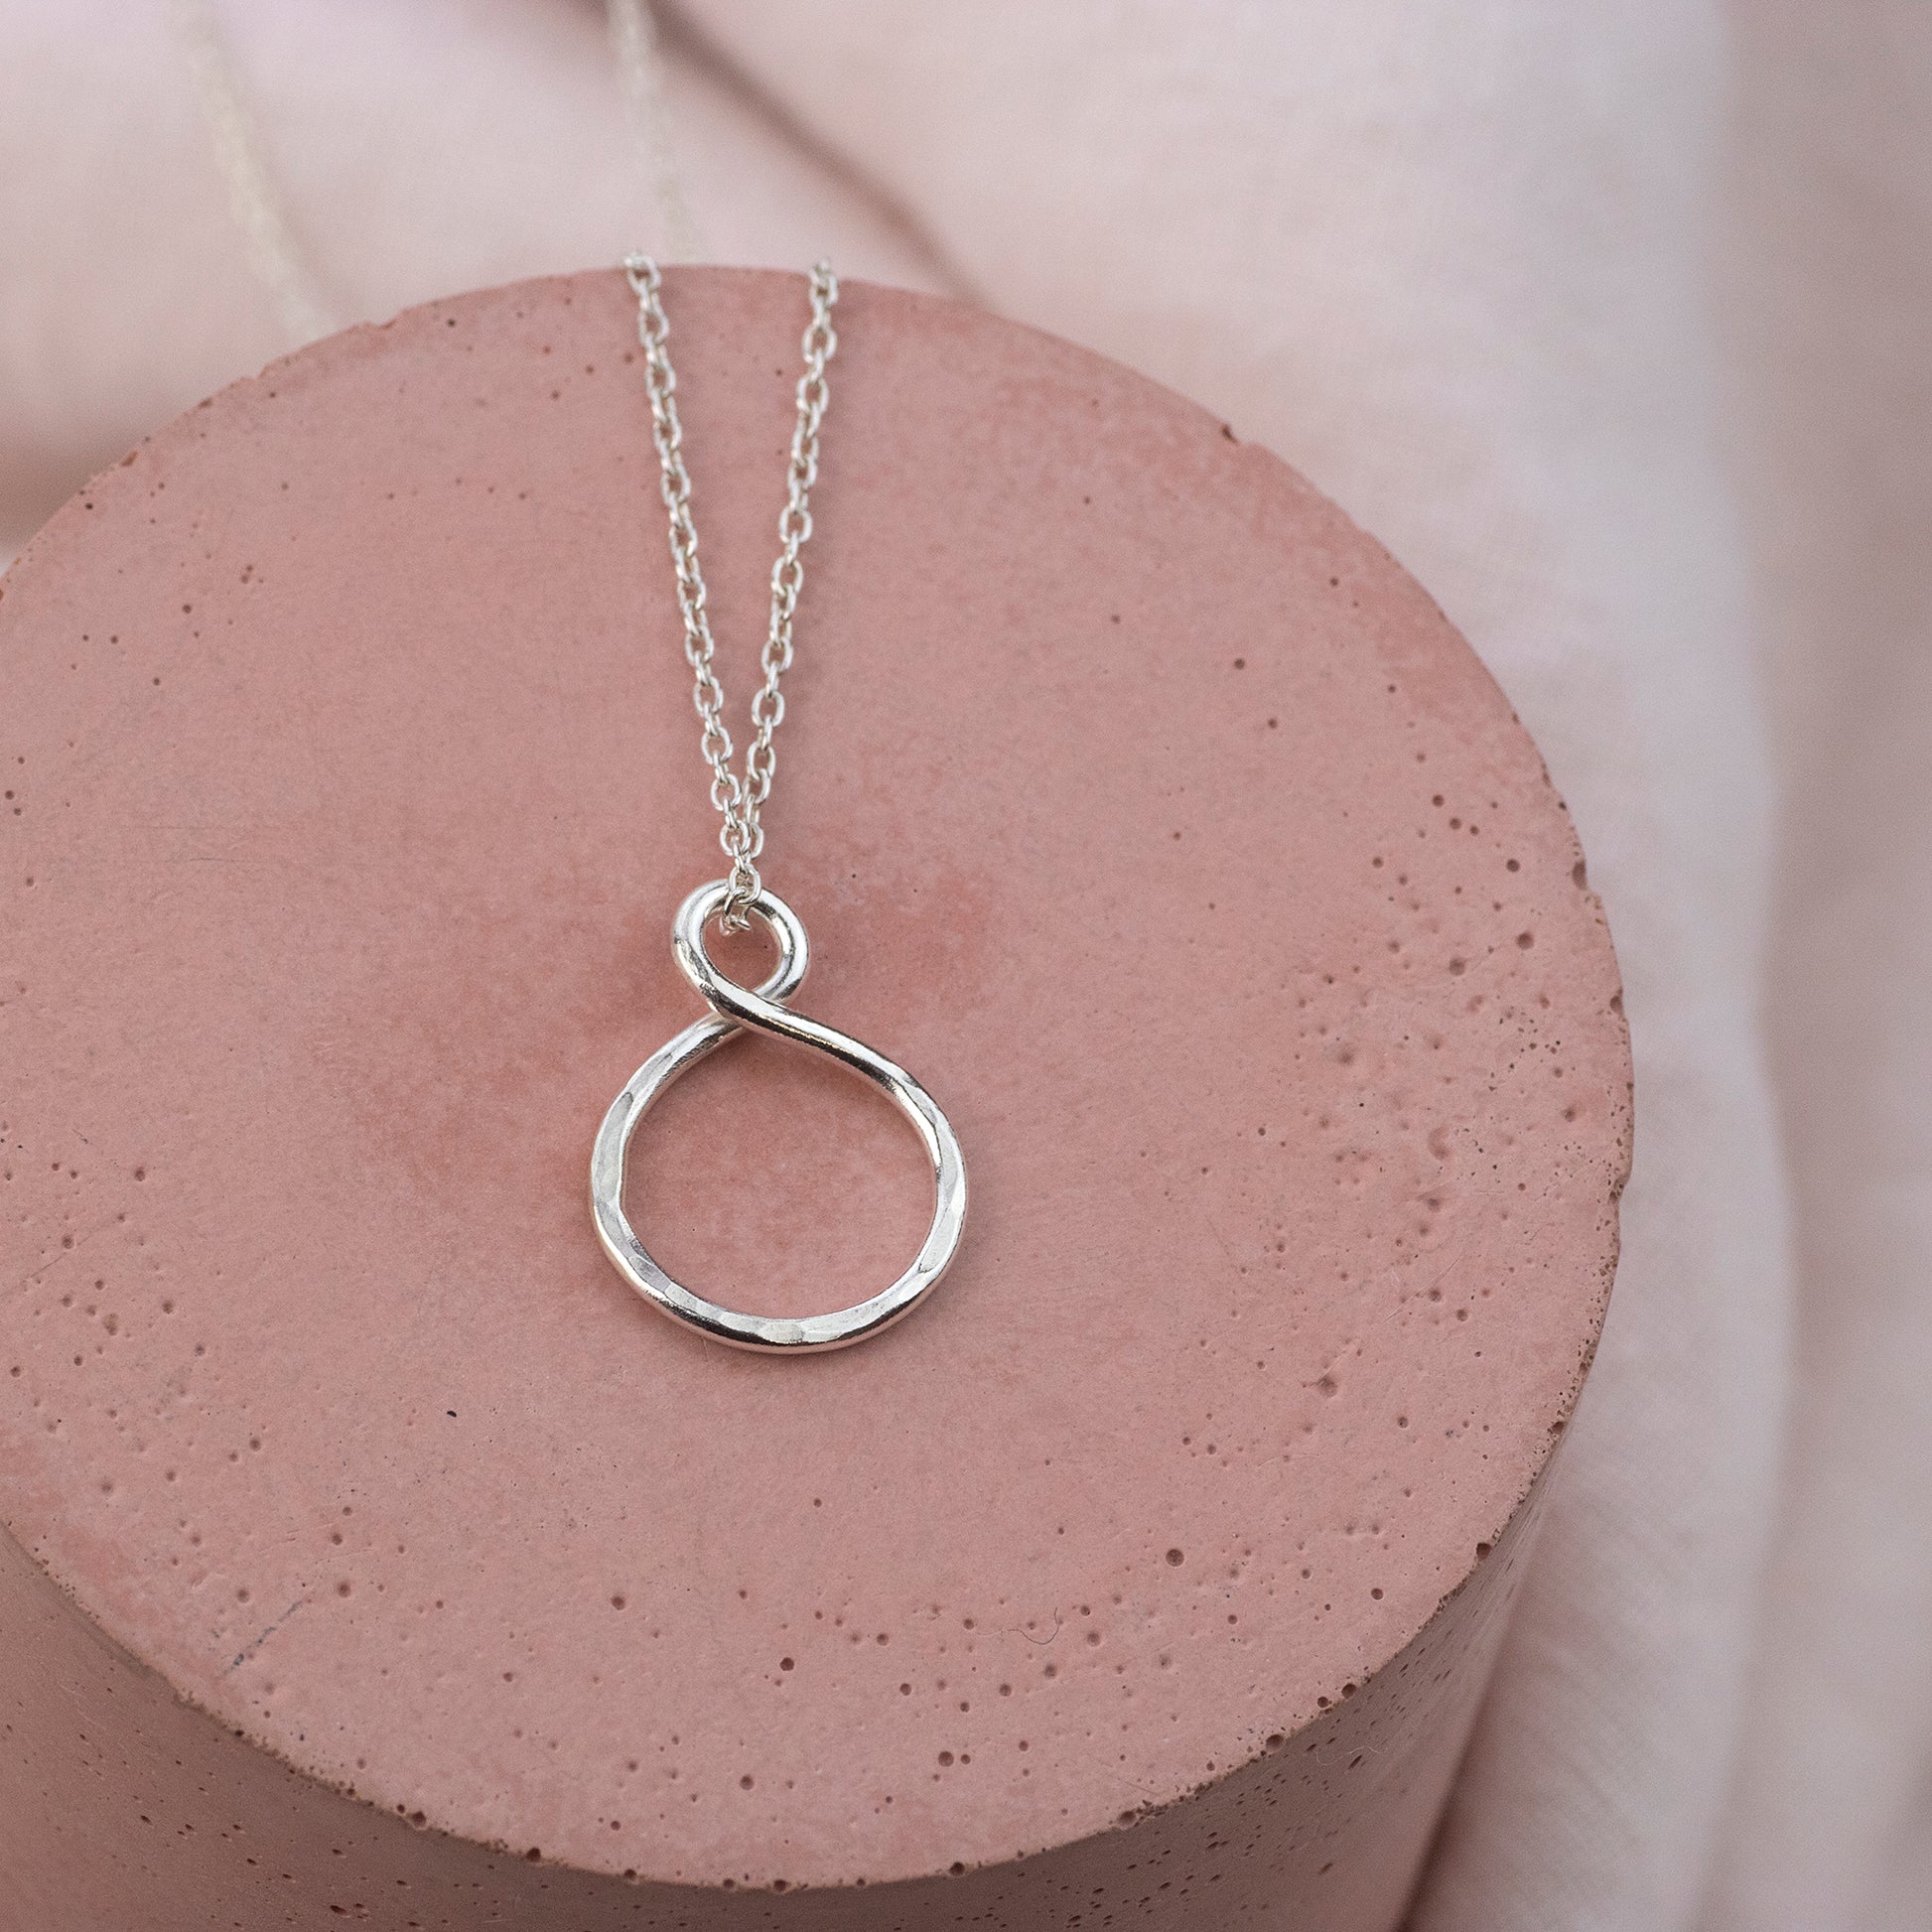 13th Birthday Gift - Petite Infinity Necklace - Silver